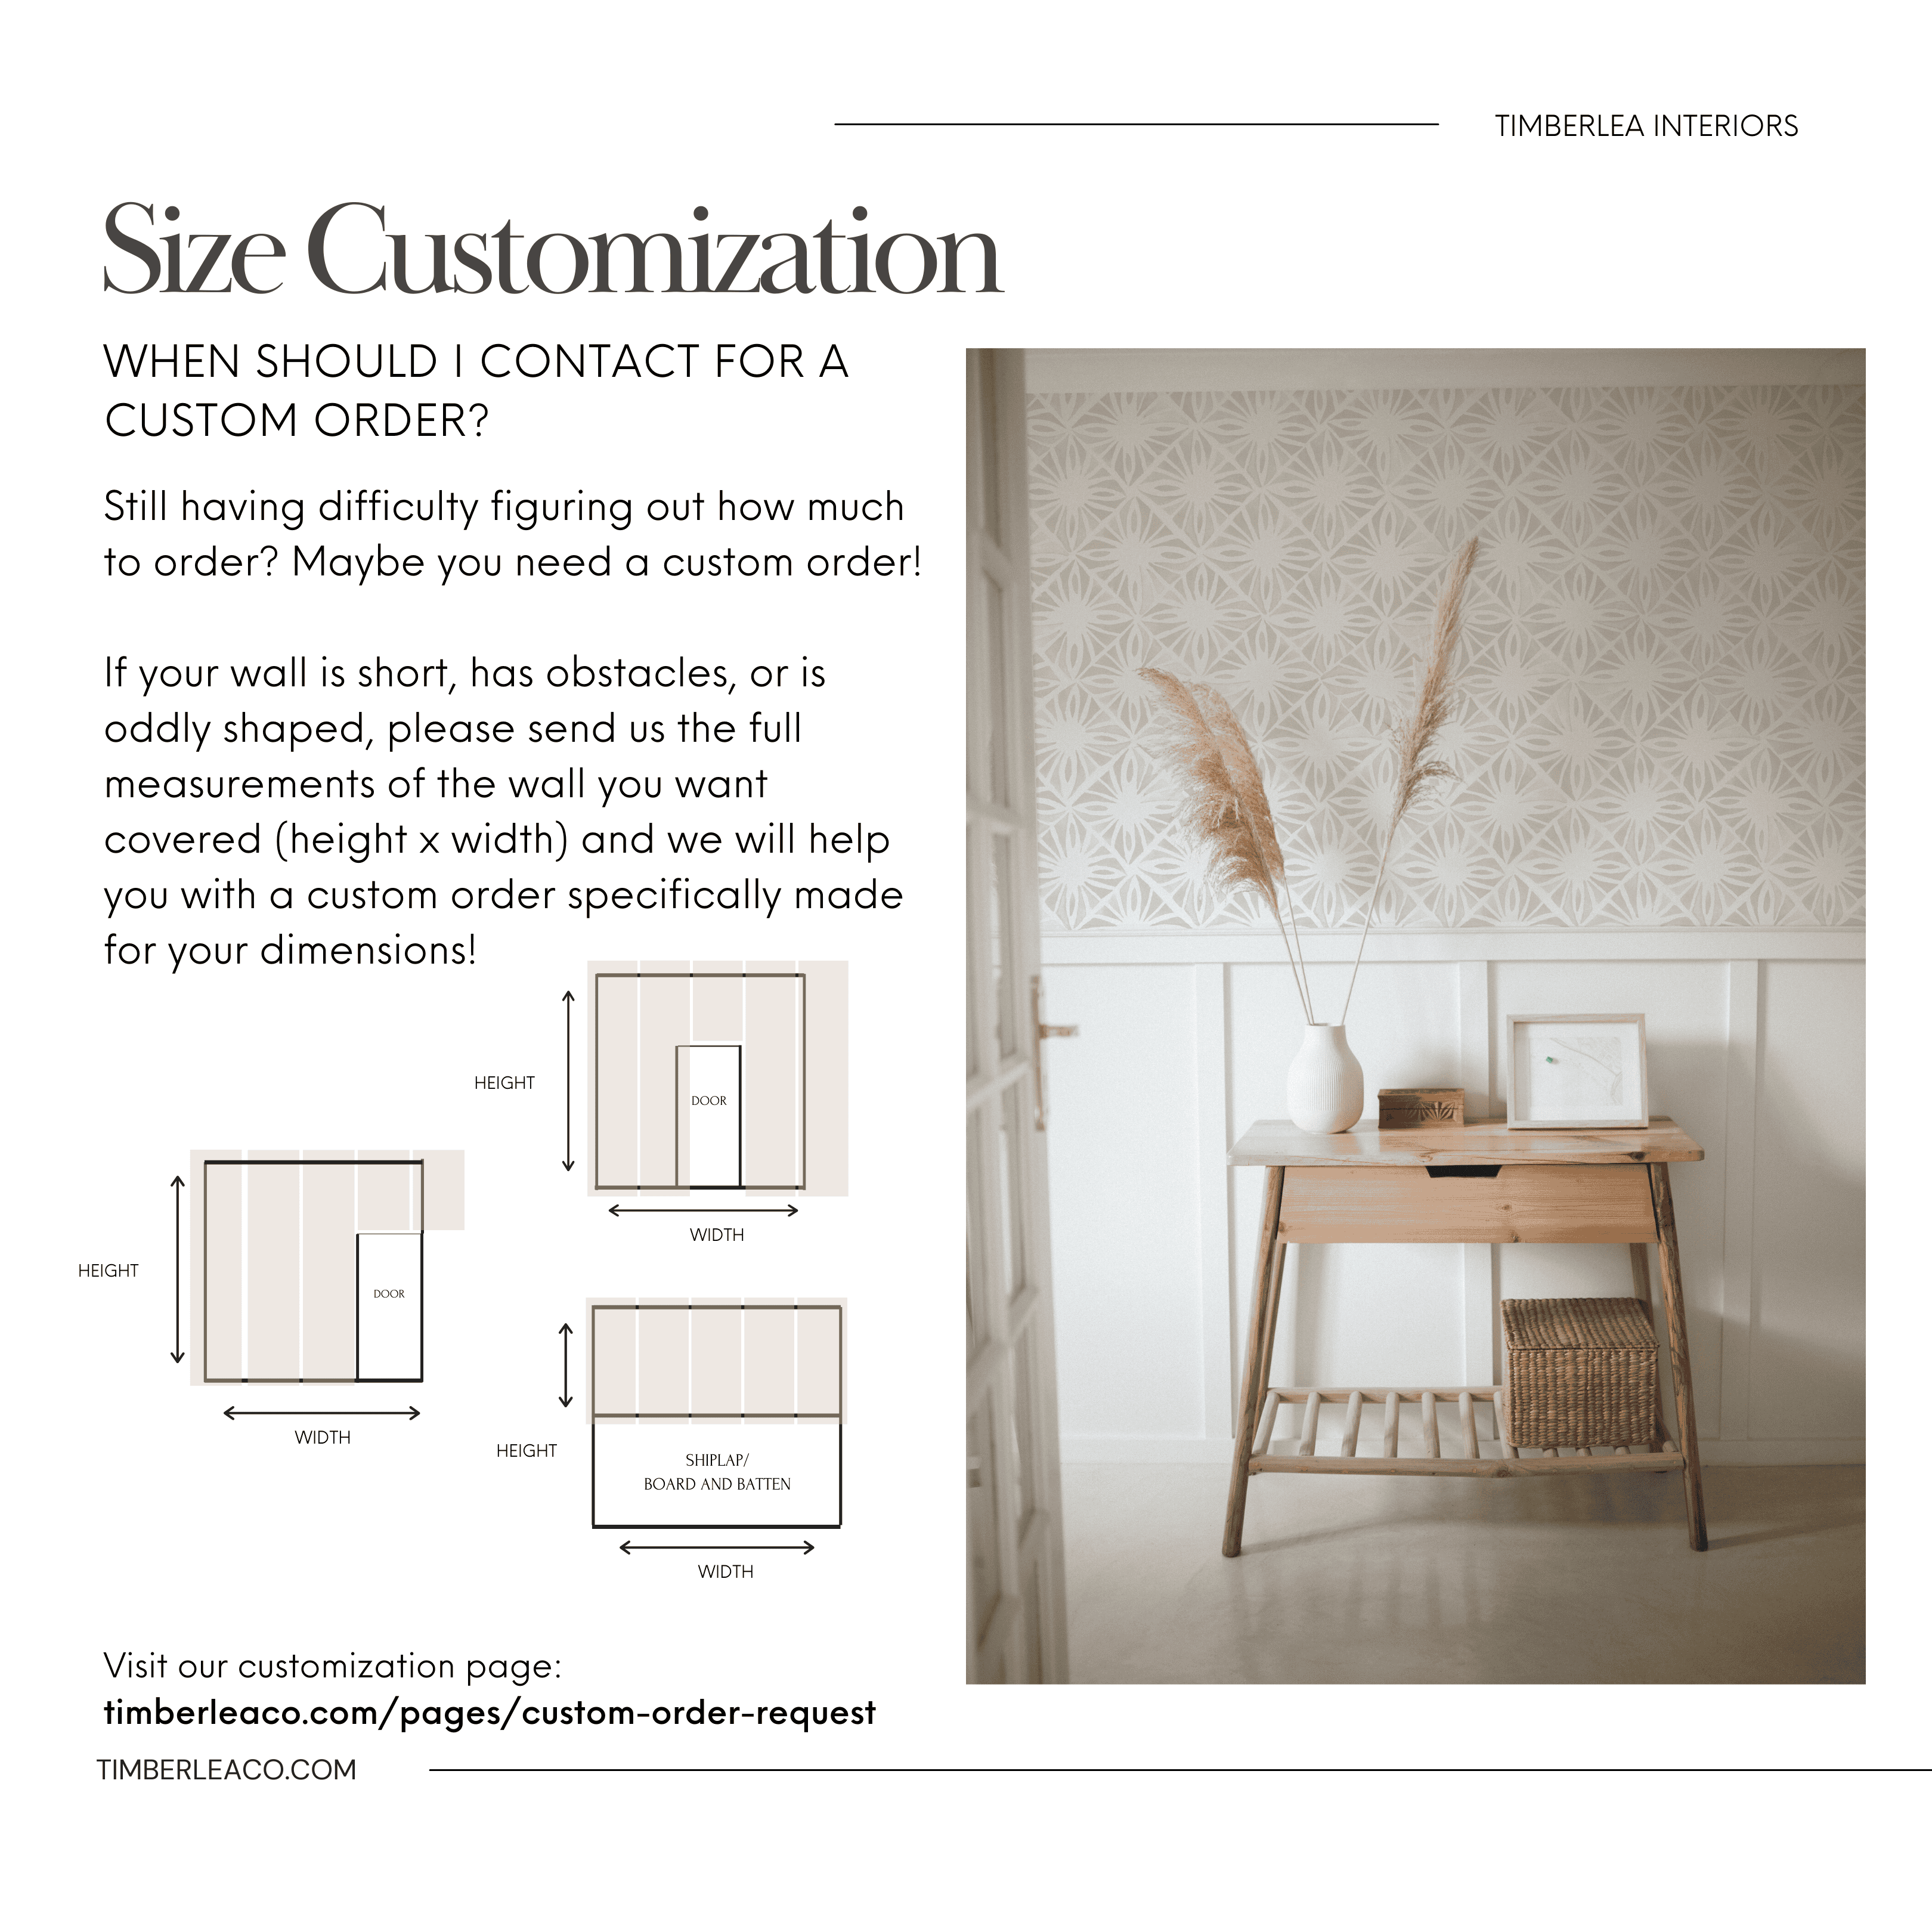 Advertisement for Timberlea Interiors featuring a 'Size Customization' service. The ad explains how to contact for a custom wallpaper order, requesting full measurements of the wall to be covered. Diagrams show how to measure different wall types, including those with doors and shiplap or batten. There's a serene photo of a wooden desk against a wallpapered wall, a vase with pampas grass, and a framed picture. Below is the URL timberleaco.com/pages/custom-order-request for more information